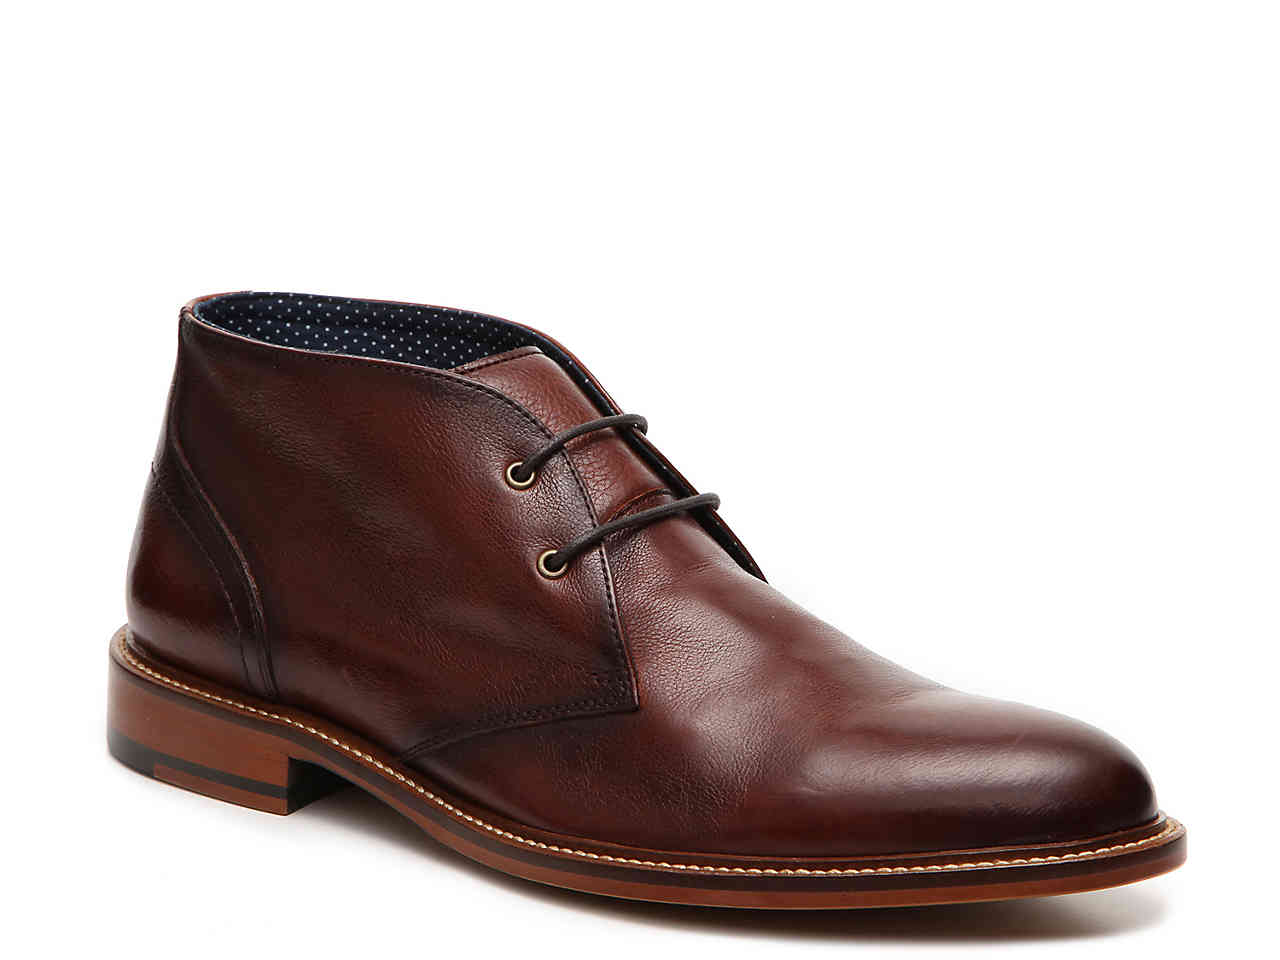 Chukka boots the best for hard surface